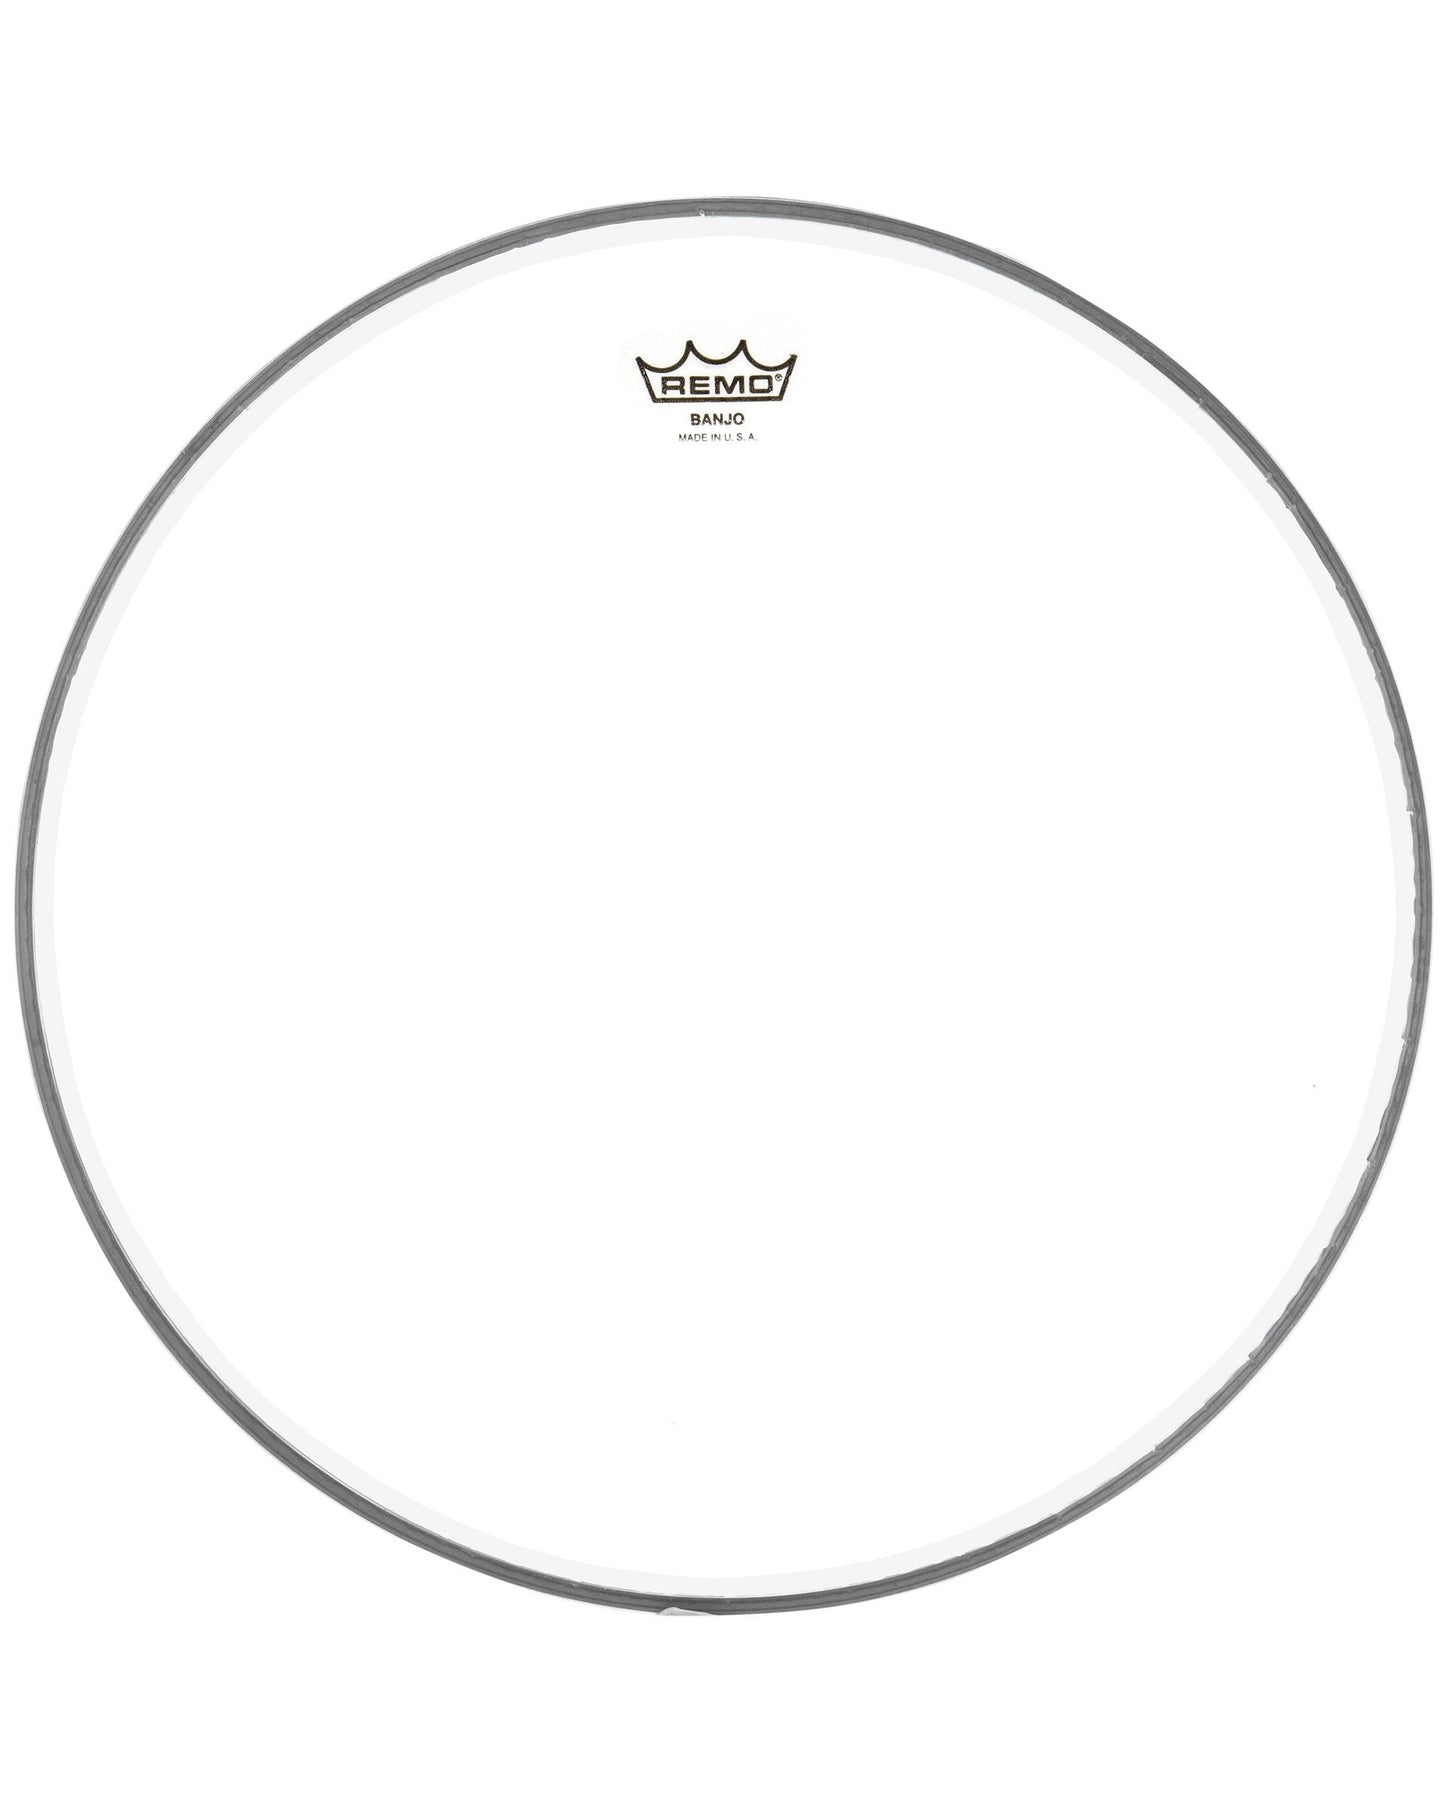 Image 1 of Remo Clear Banjo Head, 10 11/16 Inch Diameter, High Crown (1/2 Inch) - - SKU# B1011-H-CLR : Product Type Accessories & Parts : Elderly Instruments